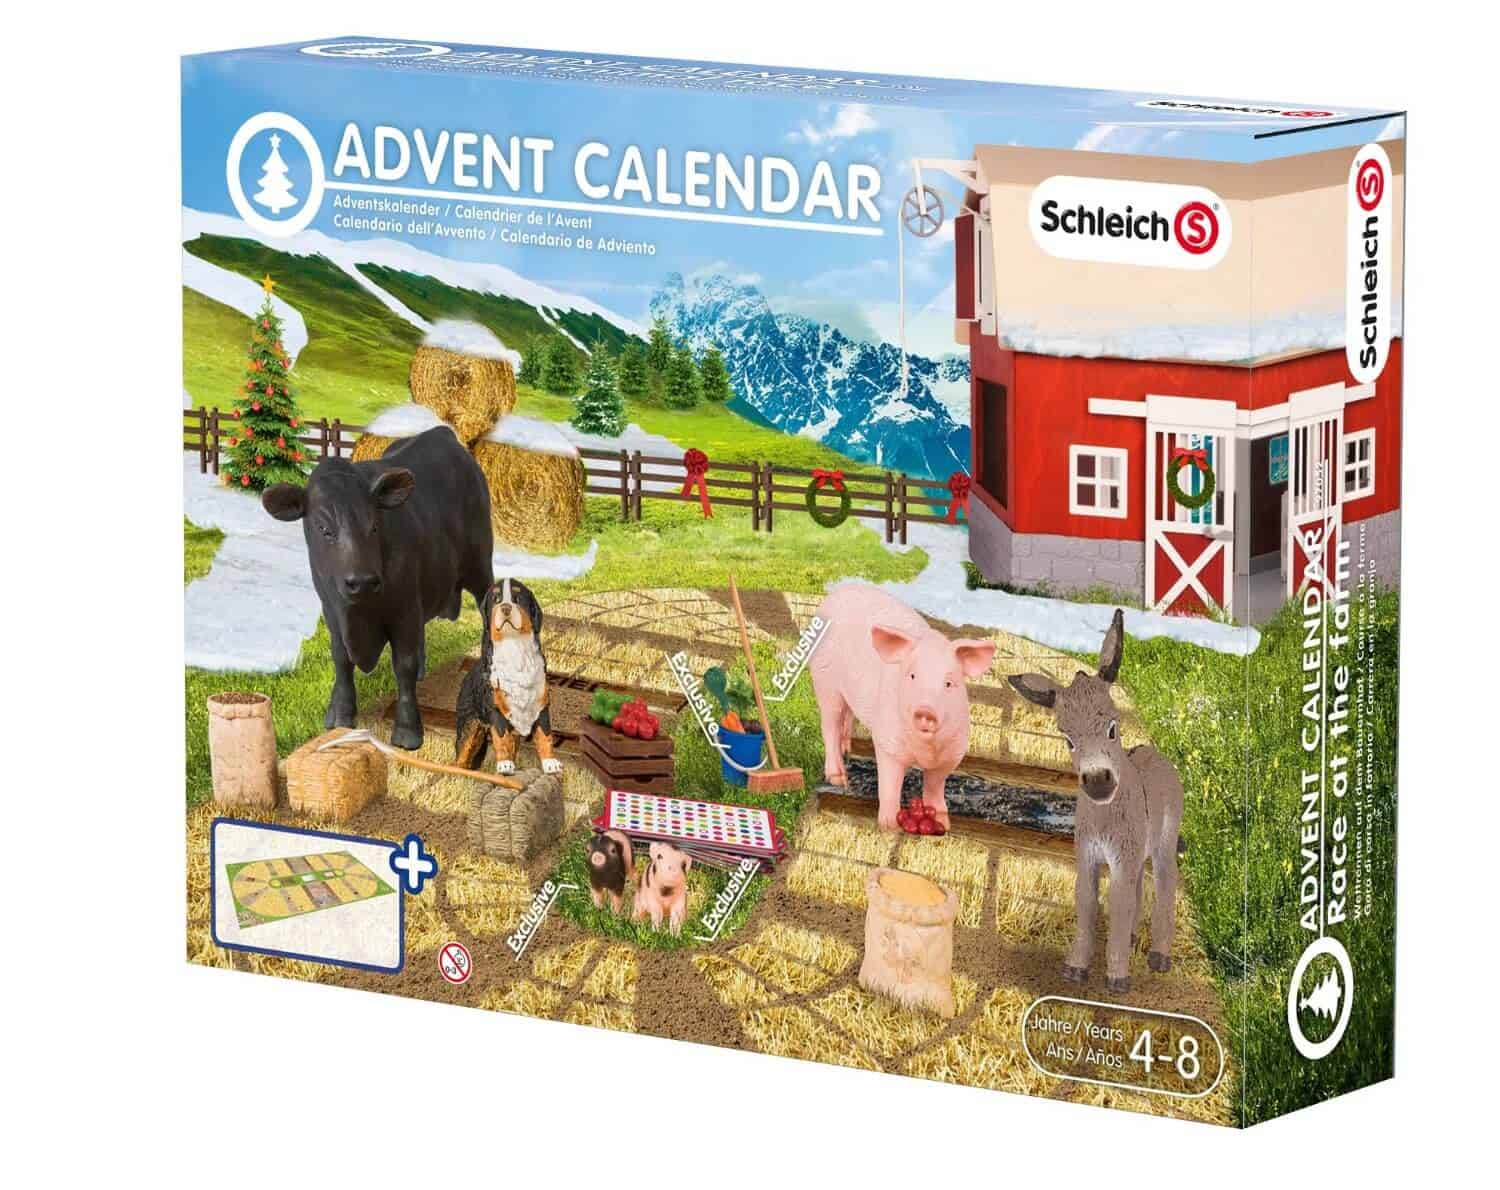 Schleich Advent Calendars Reviews Get All The Details At Hello Subscription!